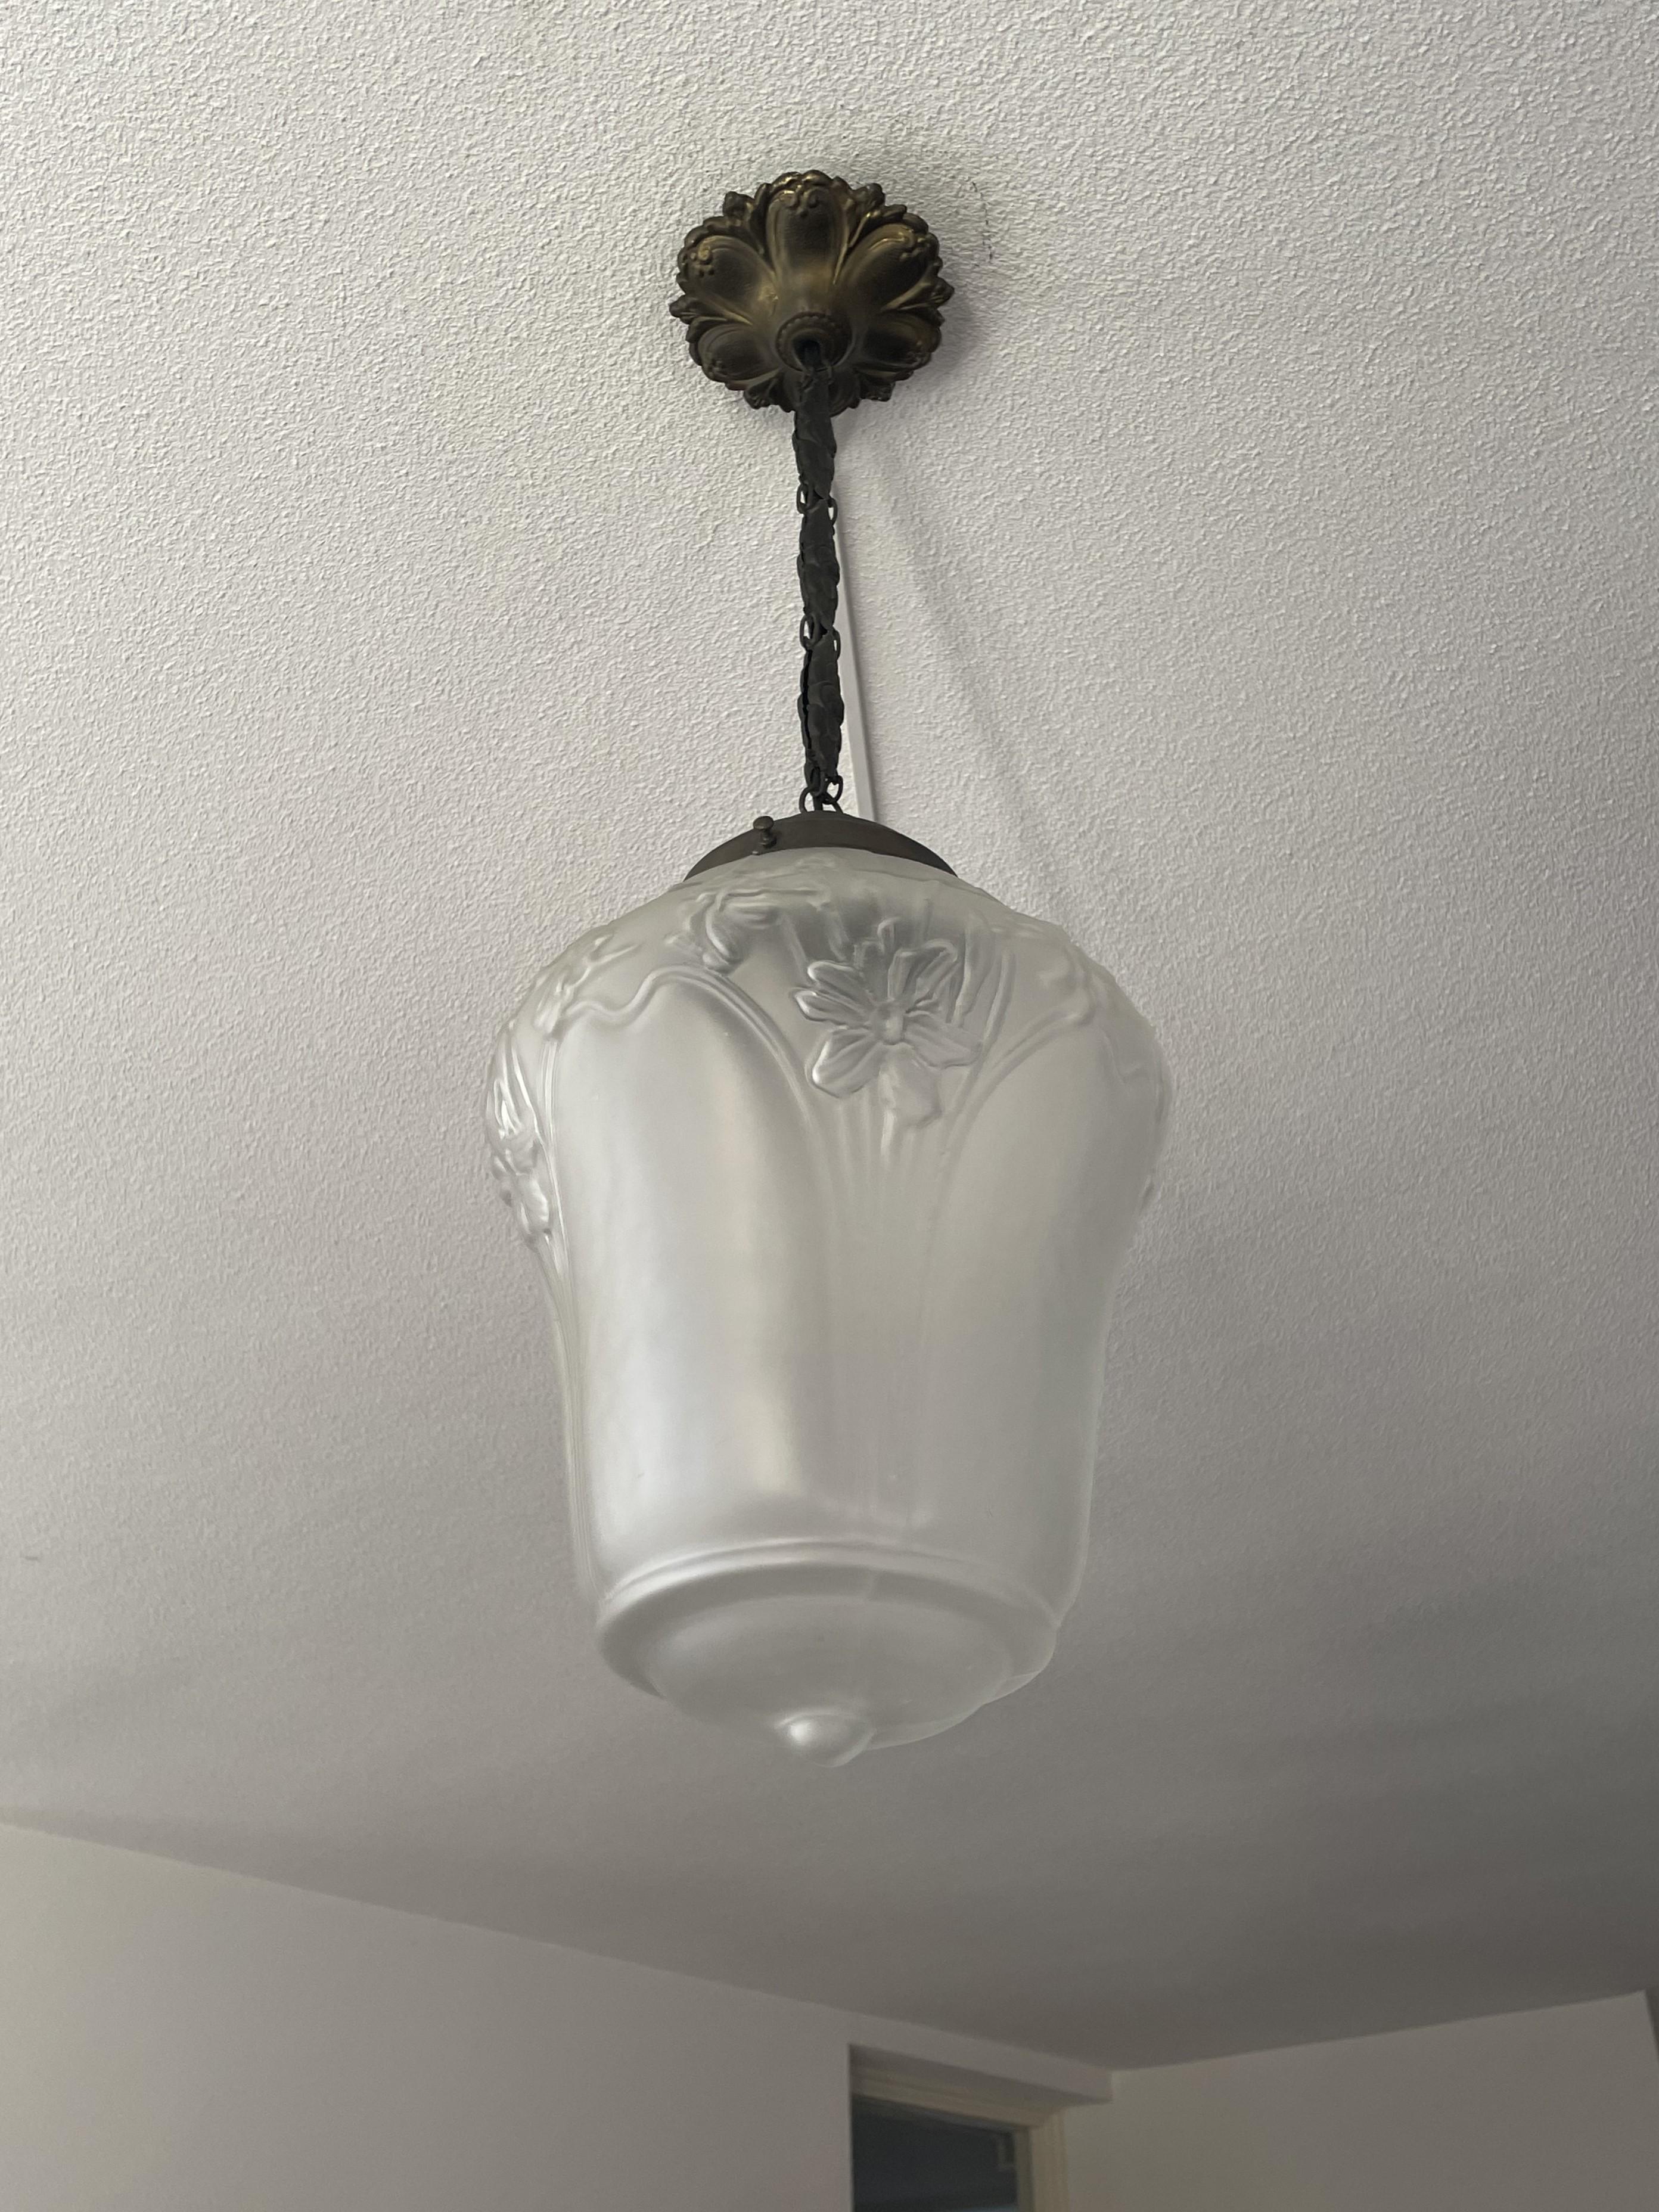 Original Arts and Crafts Glass Hallway Pendant Light with Daffodil Flowers 1900s For Sale 9